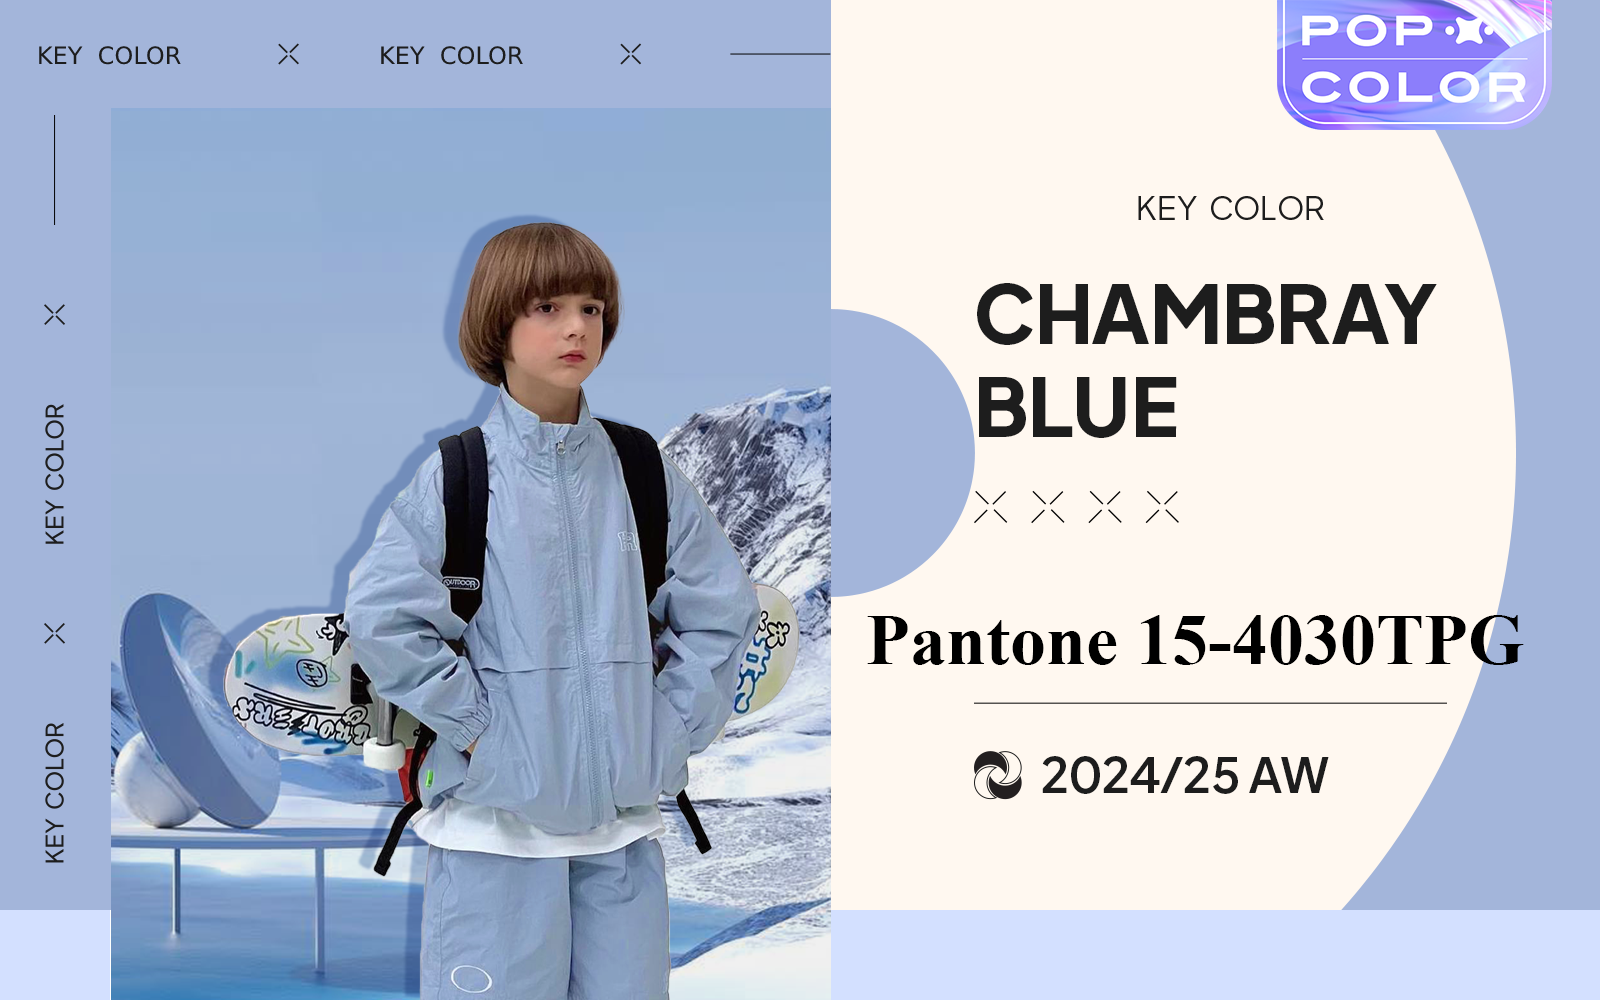 Chambray Blue -- The Color Trend for Kidswear